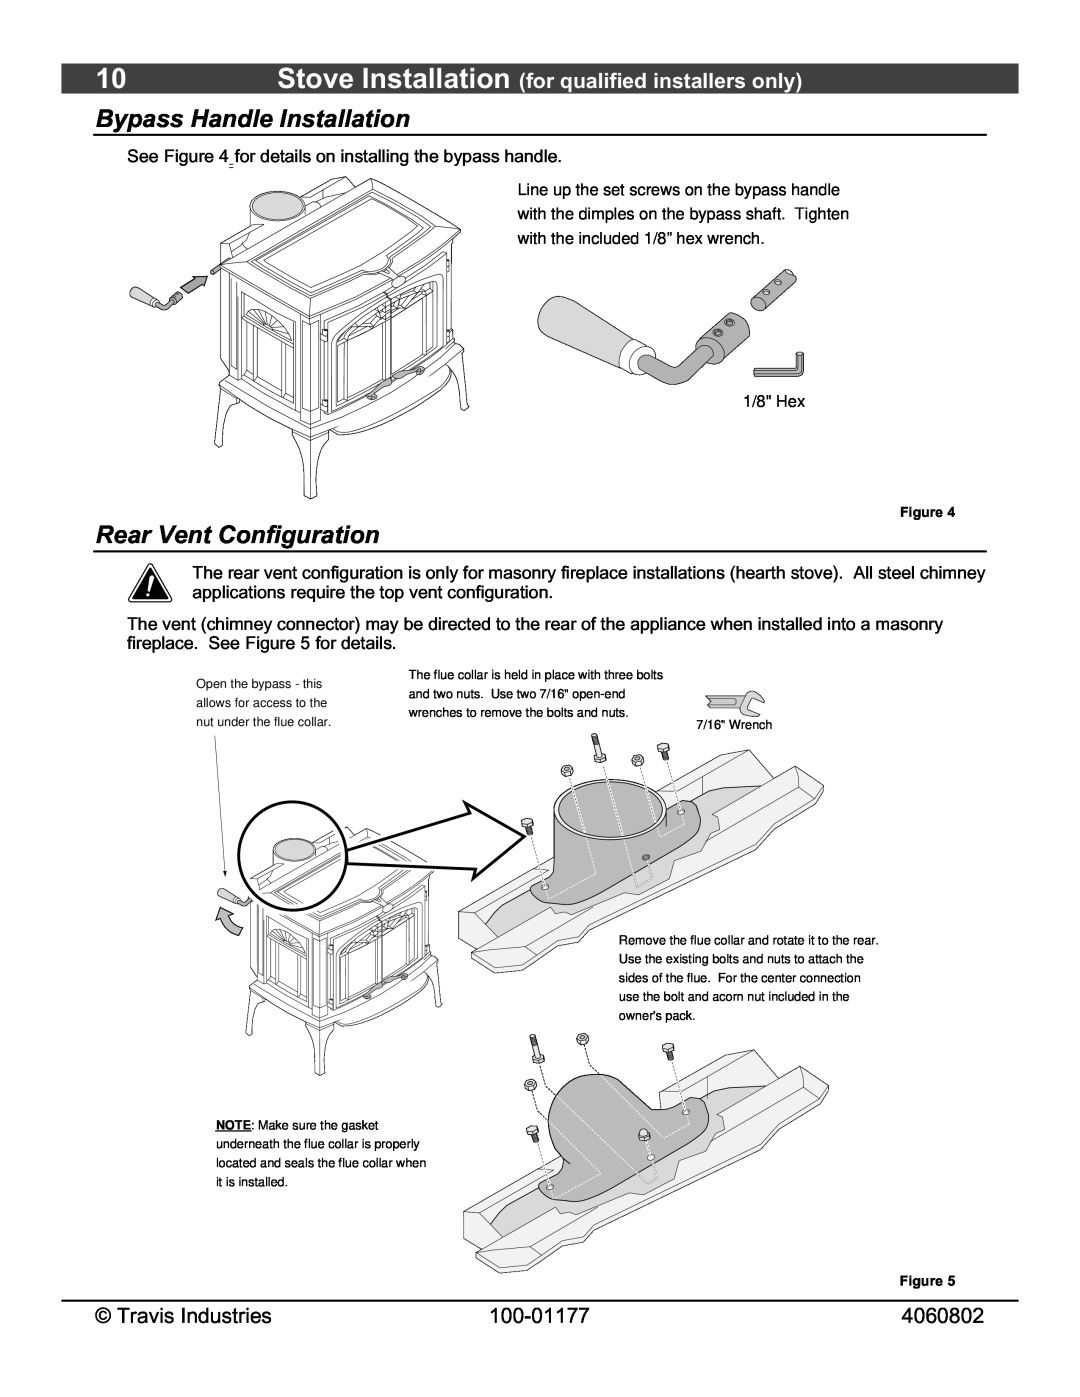 Lopi Leyden Wood Stove owner manual Bypass Handle Installation, Rear Vent Configuration, 1/8 Hex 